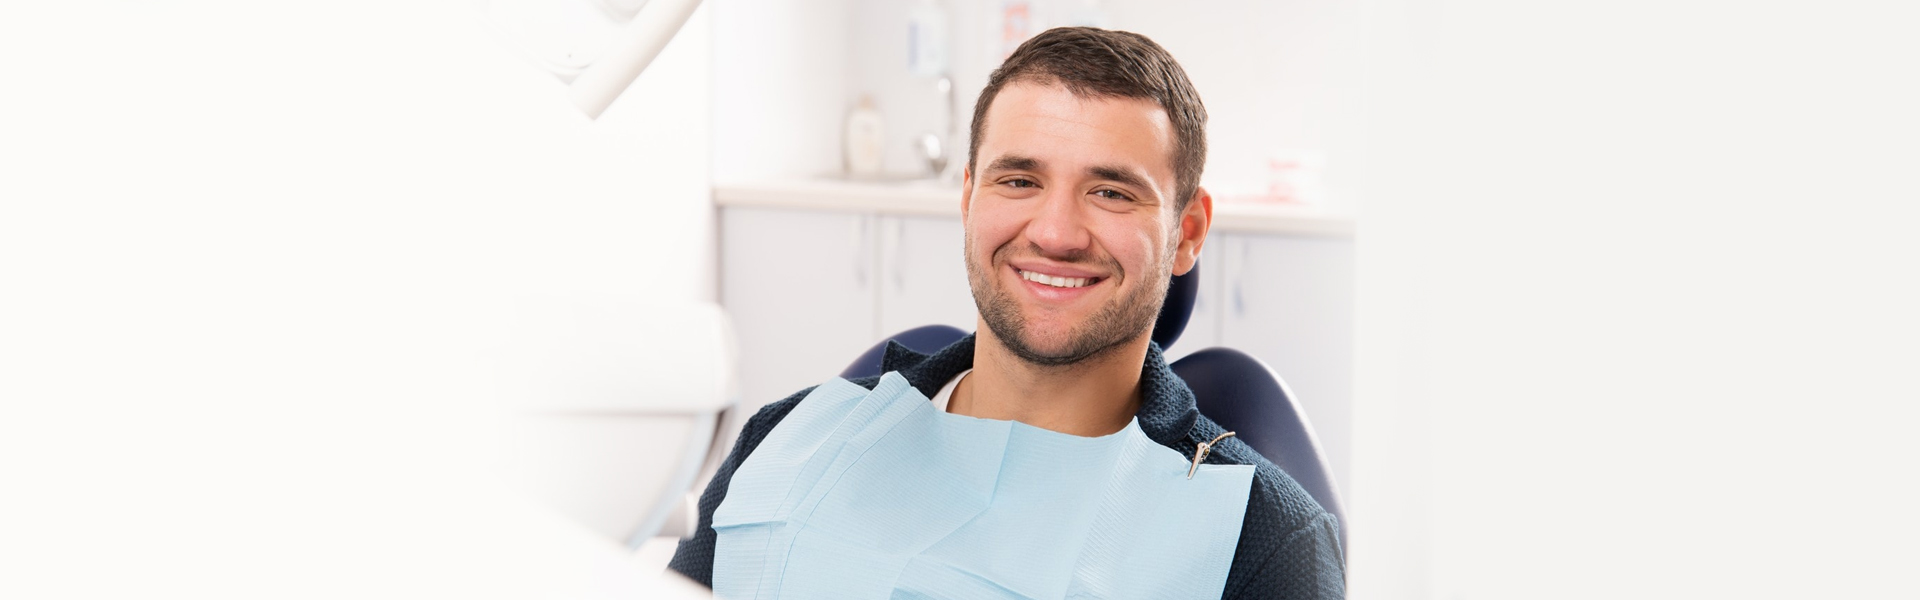 Routine Dental Exams and Cleanings: What Are They?